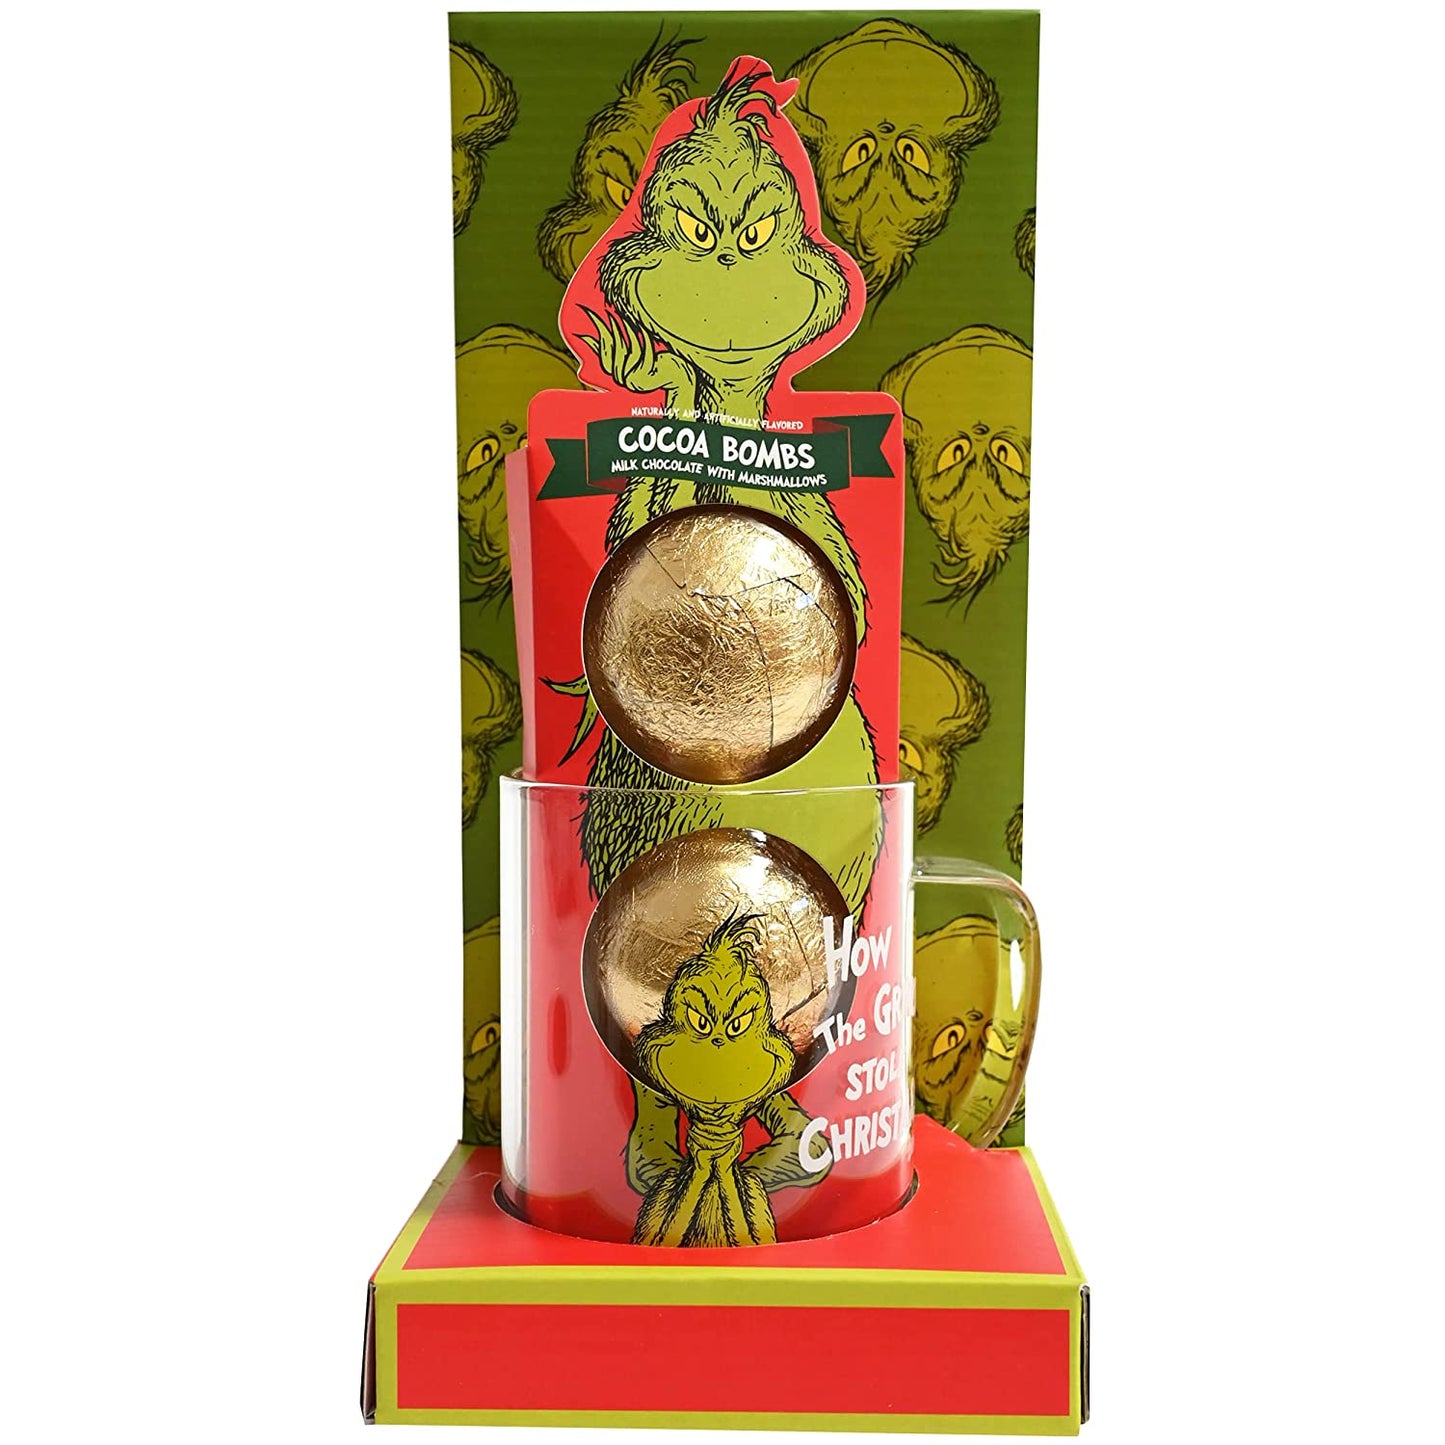 Lisa Marie's - ❤️❤️❤️❤️ THE GRINCH IS BACK!! ❤️❤️❤️❤️❤️ GRINCH HOT COCOA  BOMB GIFT SETS!! Will be available the whole month of December until  supplies run out! These will not last long!!